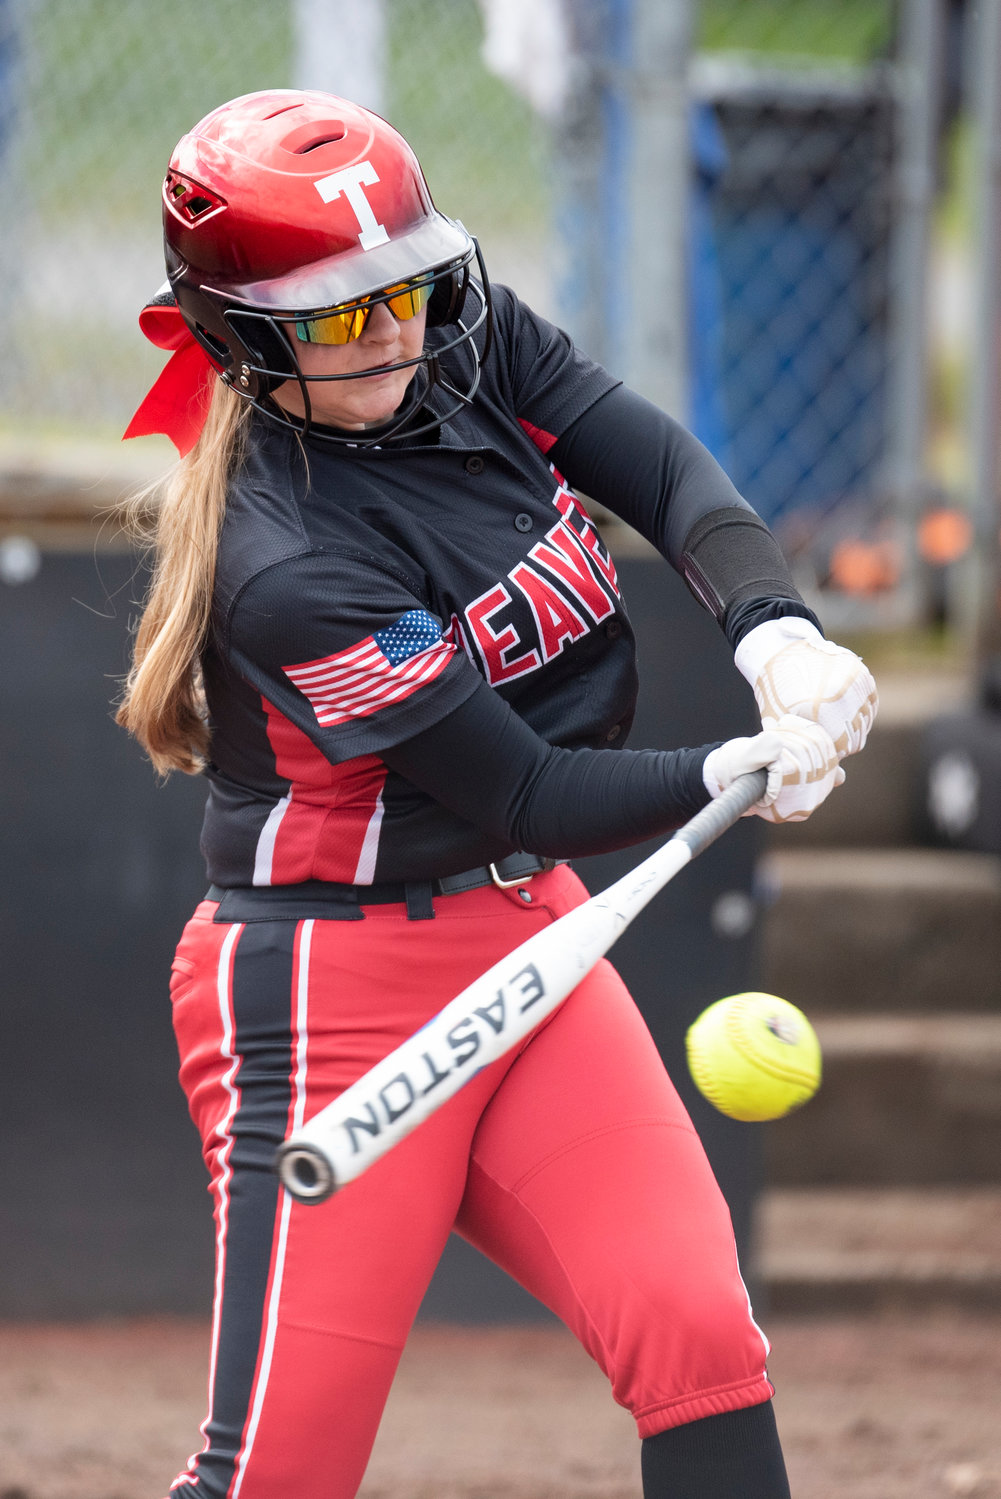 Tenino's Sophia Hussey lines up a Tenino pitch at home on March 16.